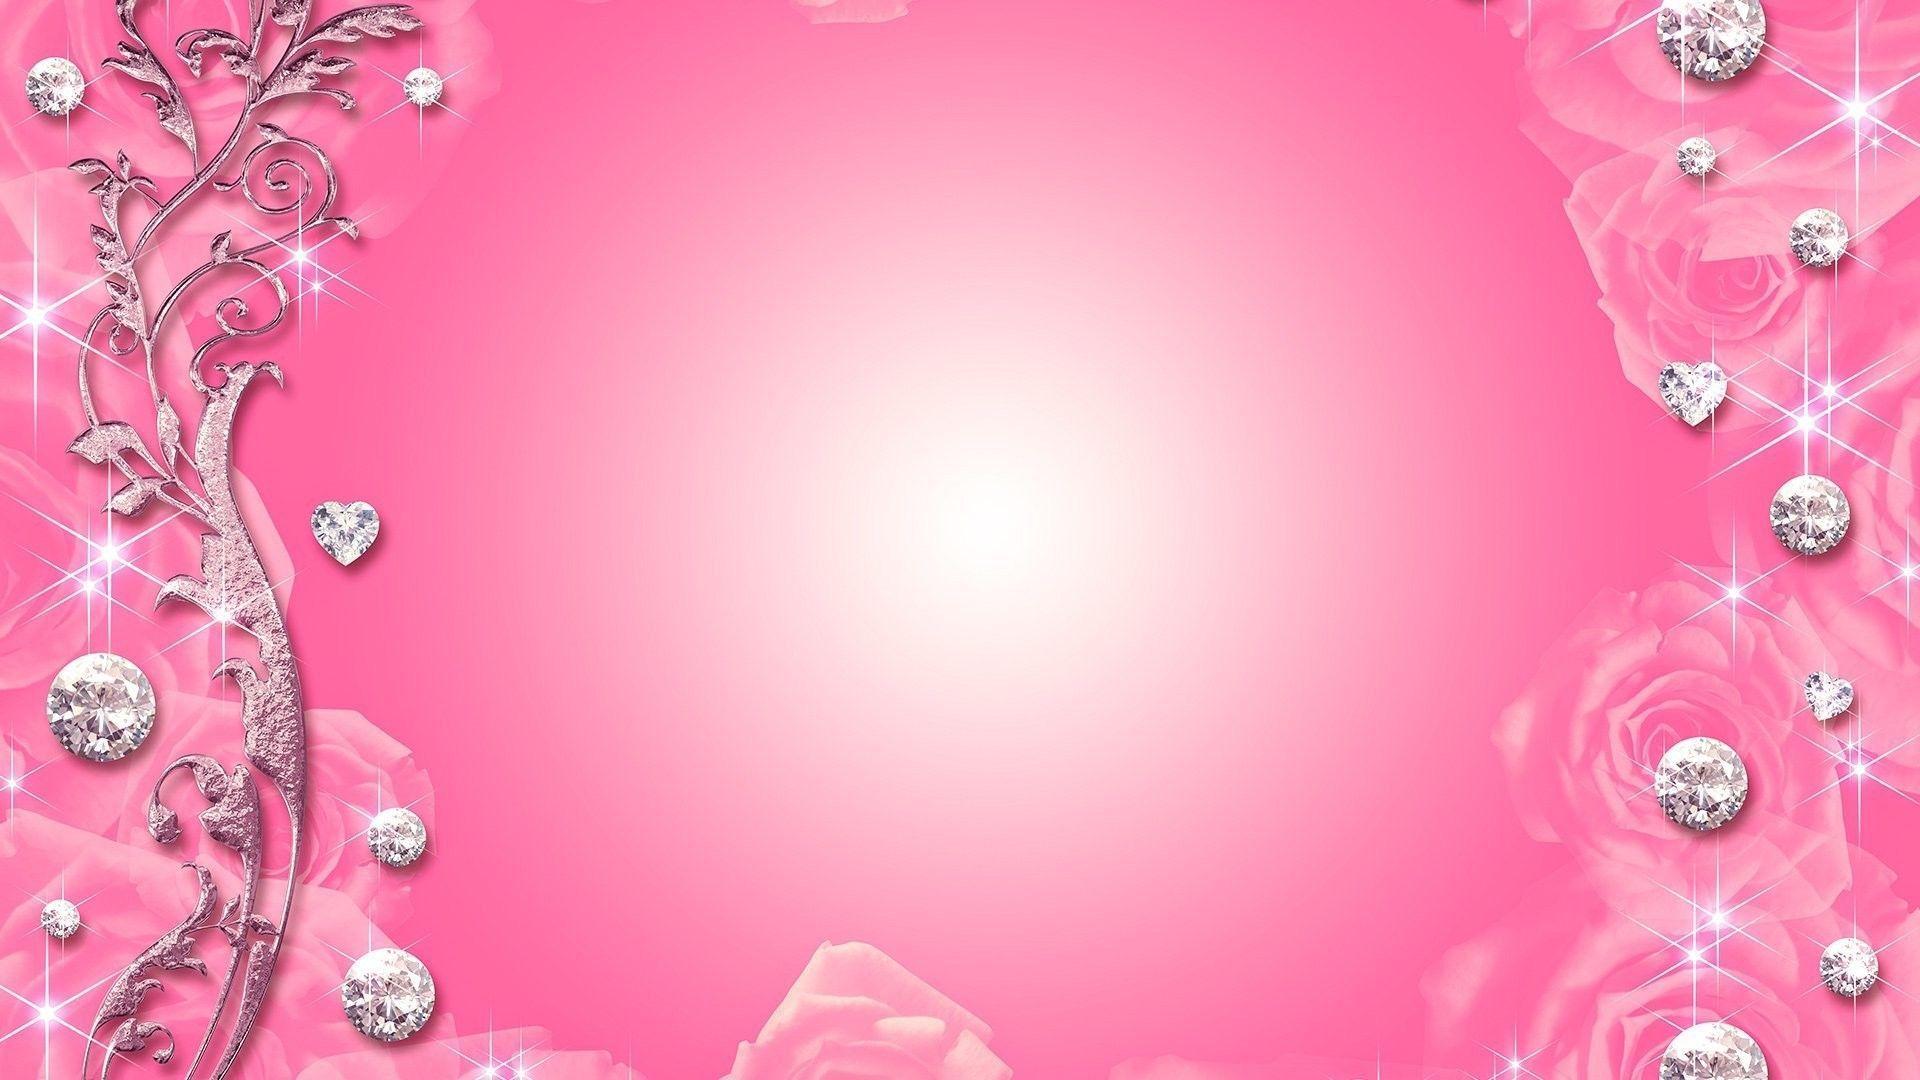 Pink wallpaper HD image free download for computers